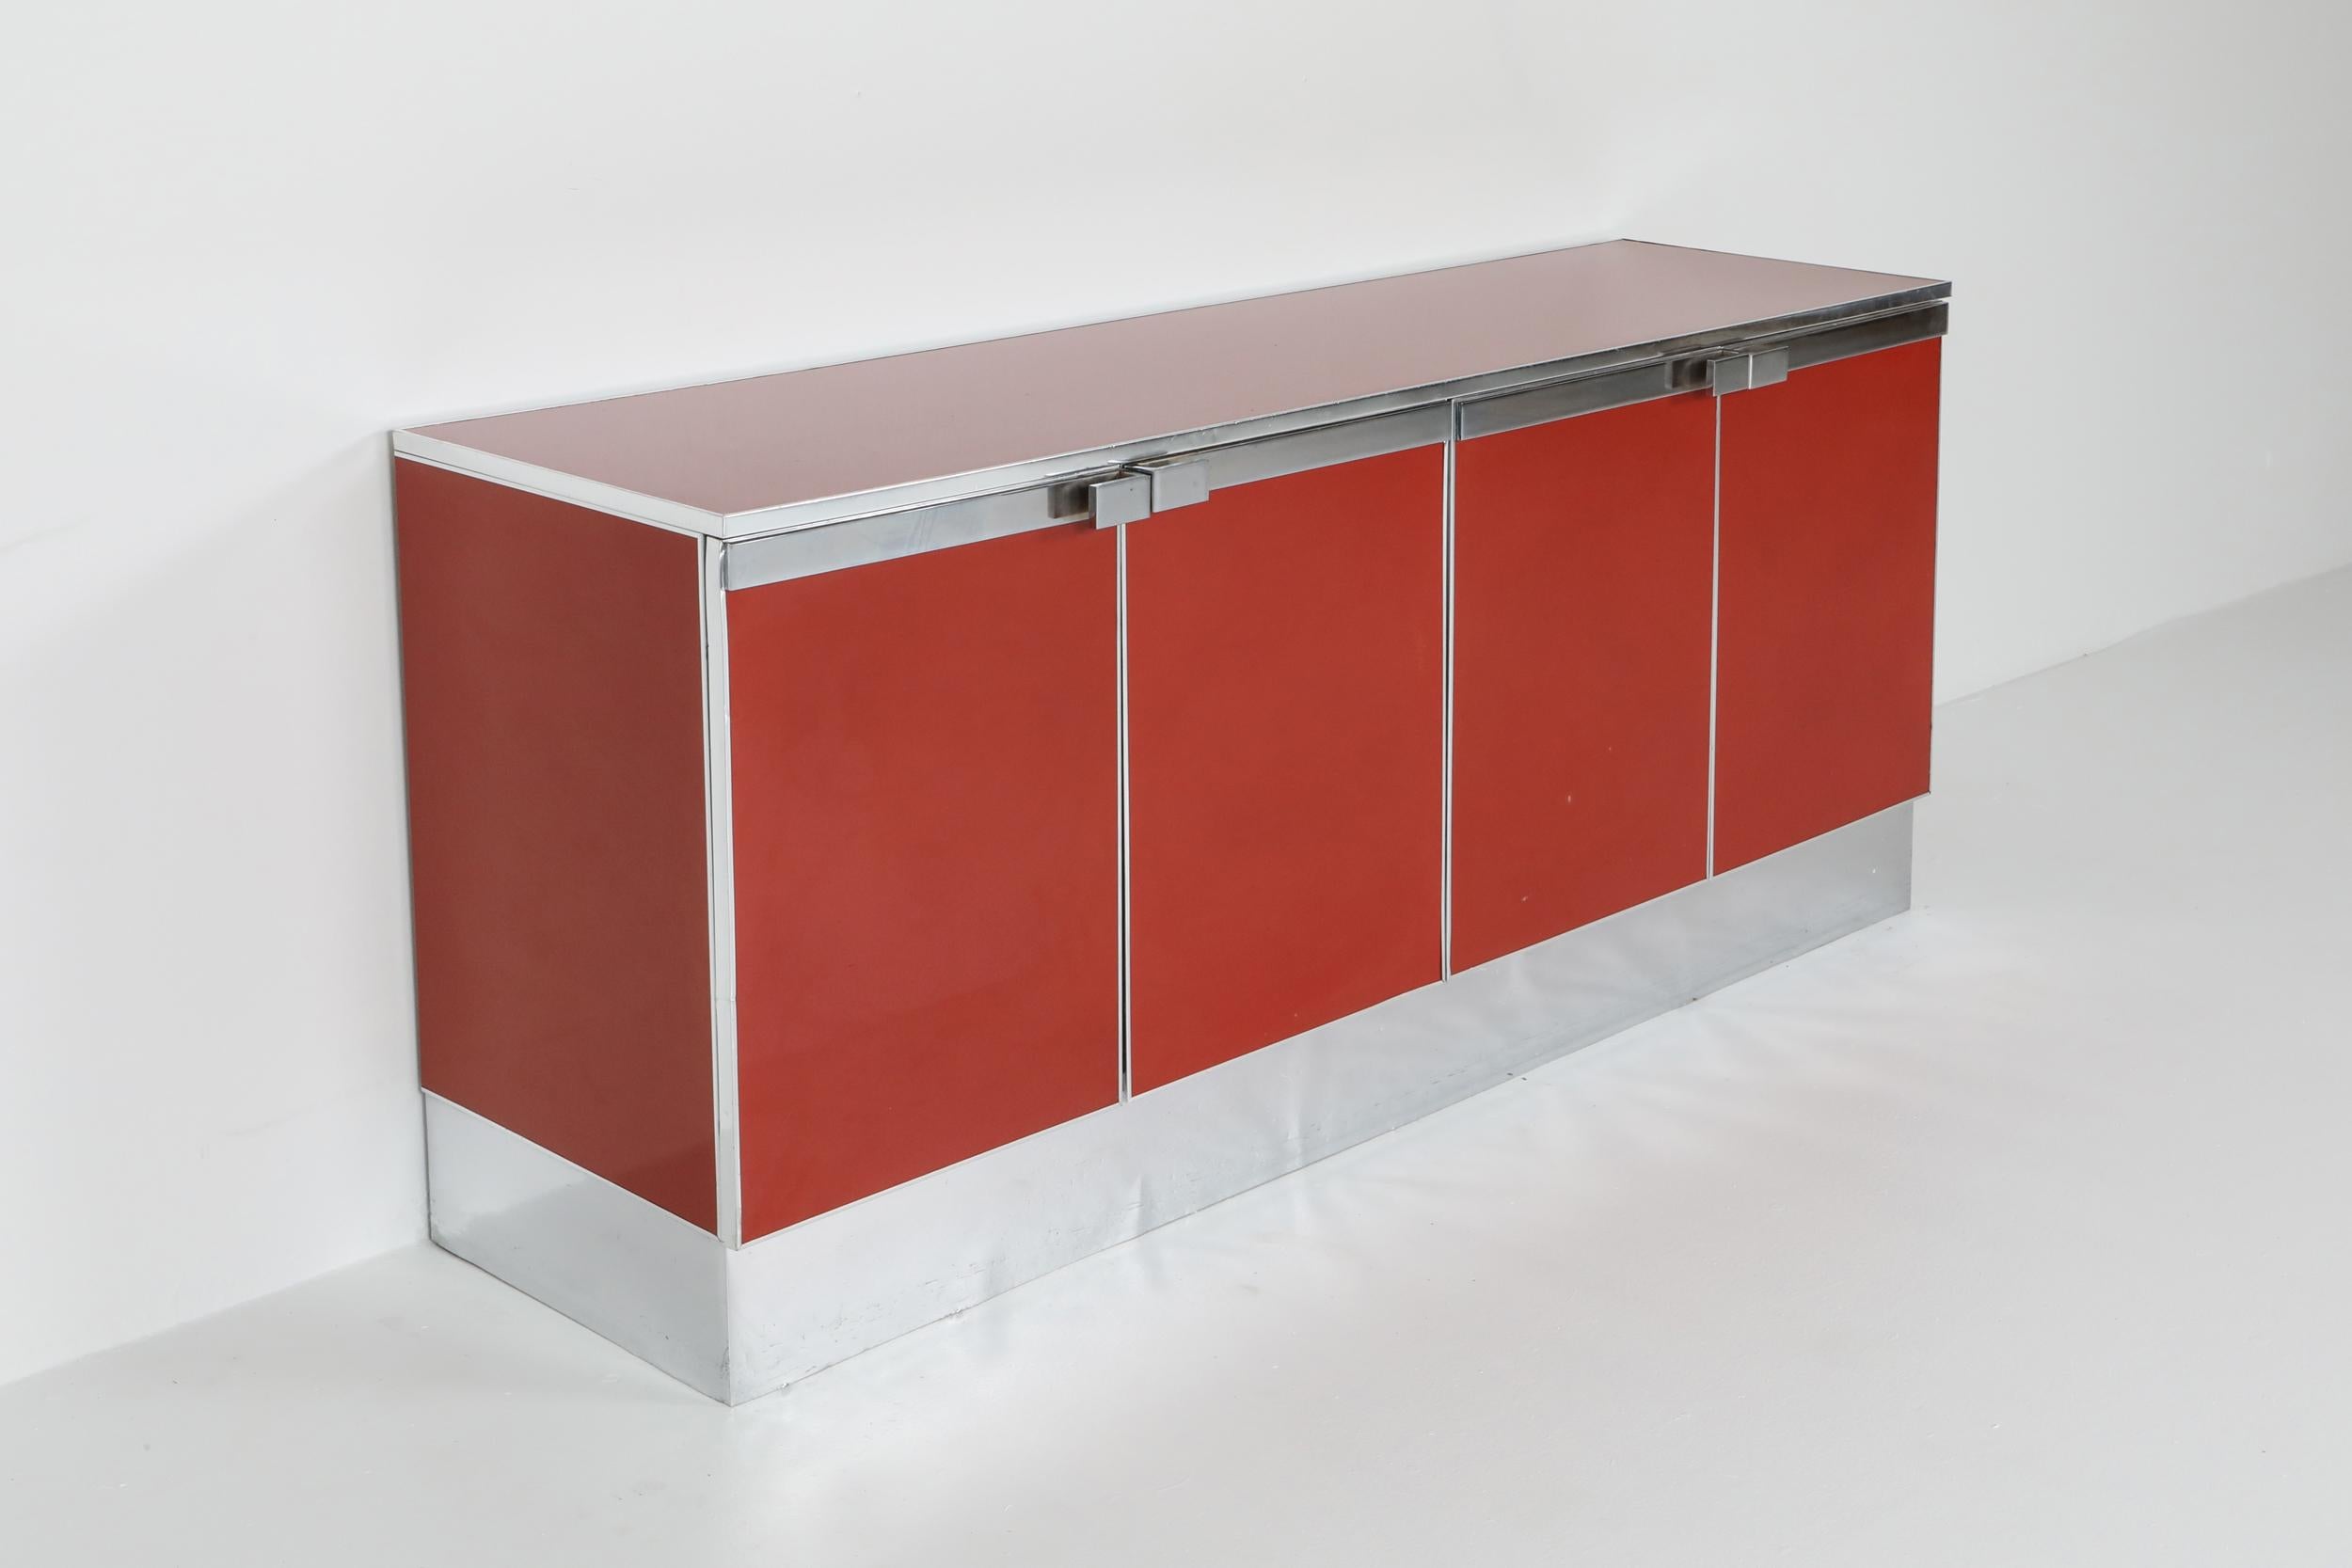 Eclectic Postmodern sideboard in red lacquer with chrome detailing all around.
The credenza has four lacquered doors that hide shelving and a drawer.
Would fit well in a metropolitan chic decor inspired by Romeo Rega, Willy Rizzo, and Mario